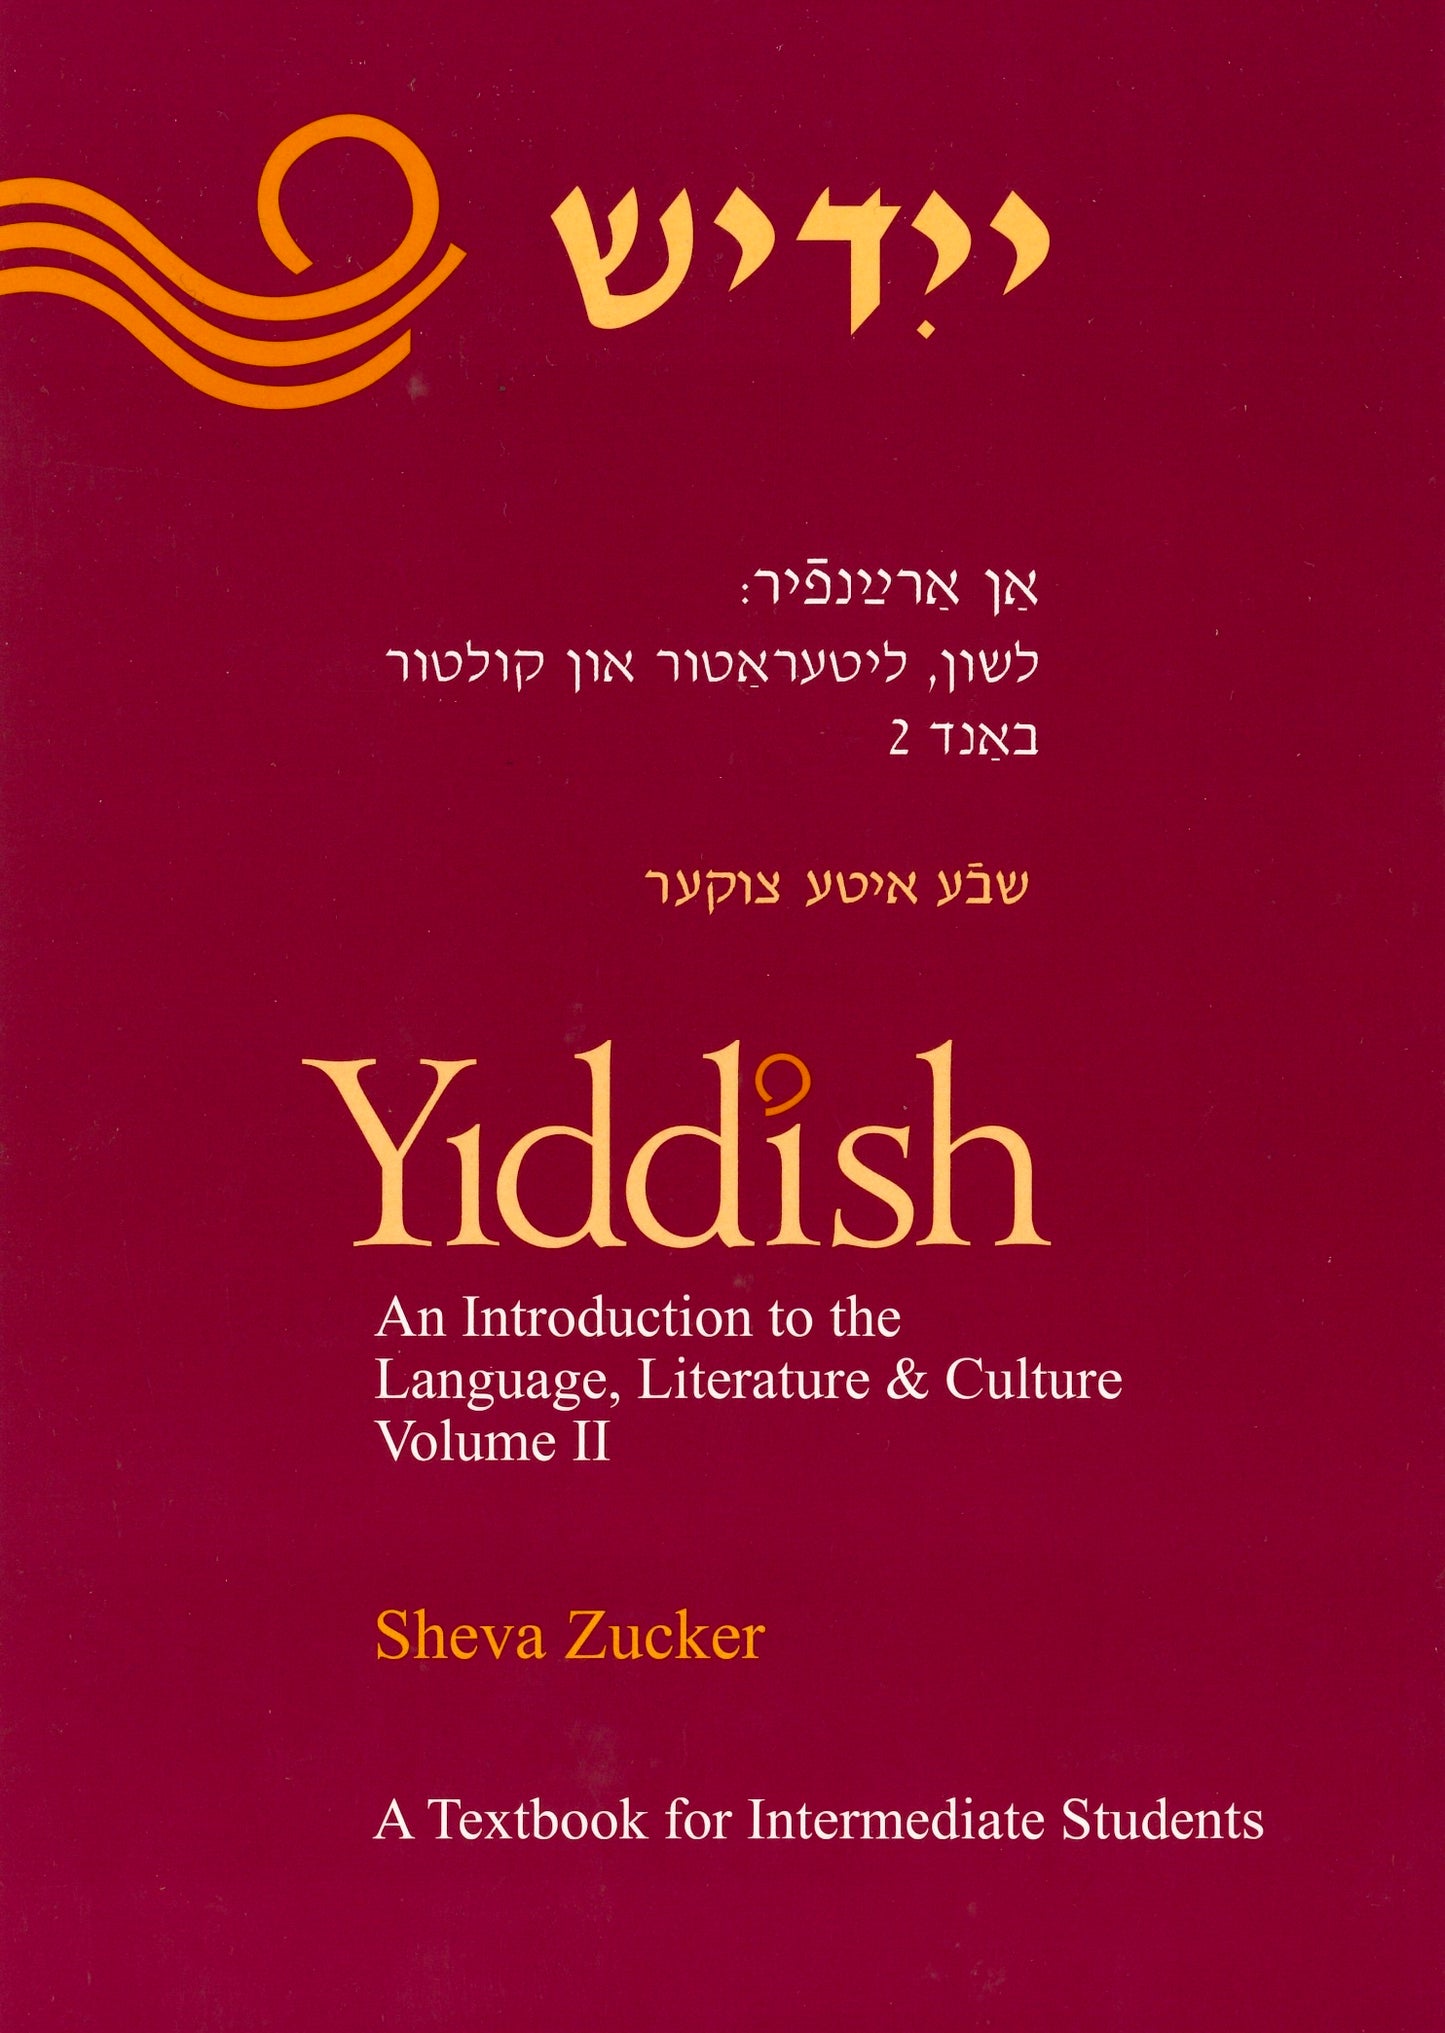 Yiddish: An Introduction to the Language, Literature & Culture, Vol. II